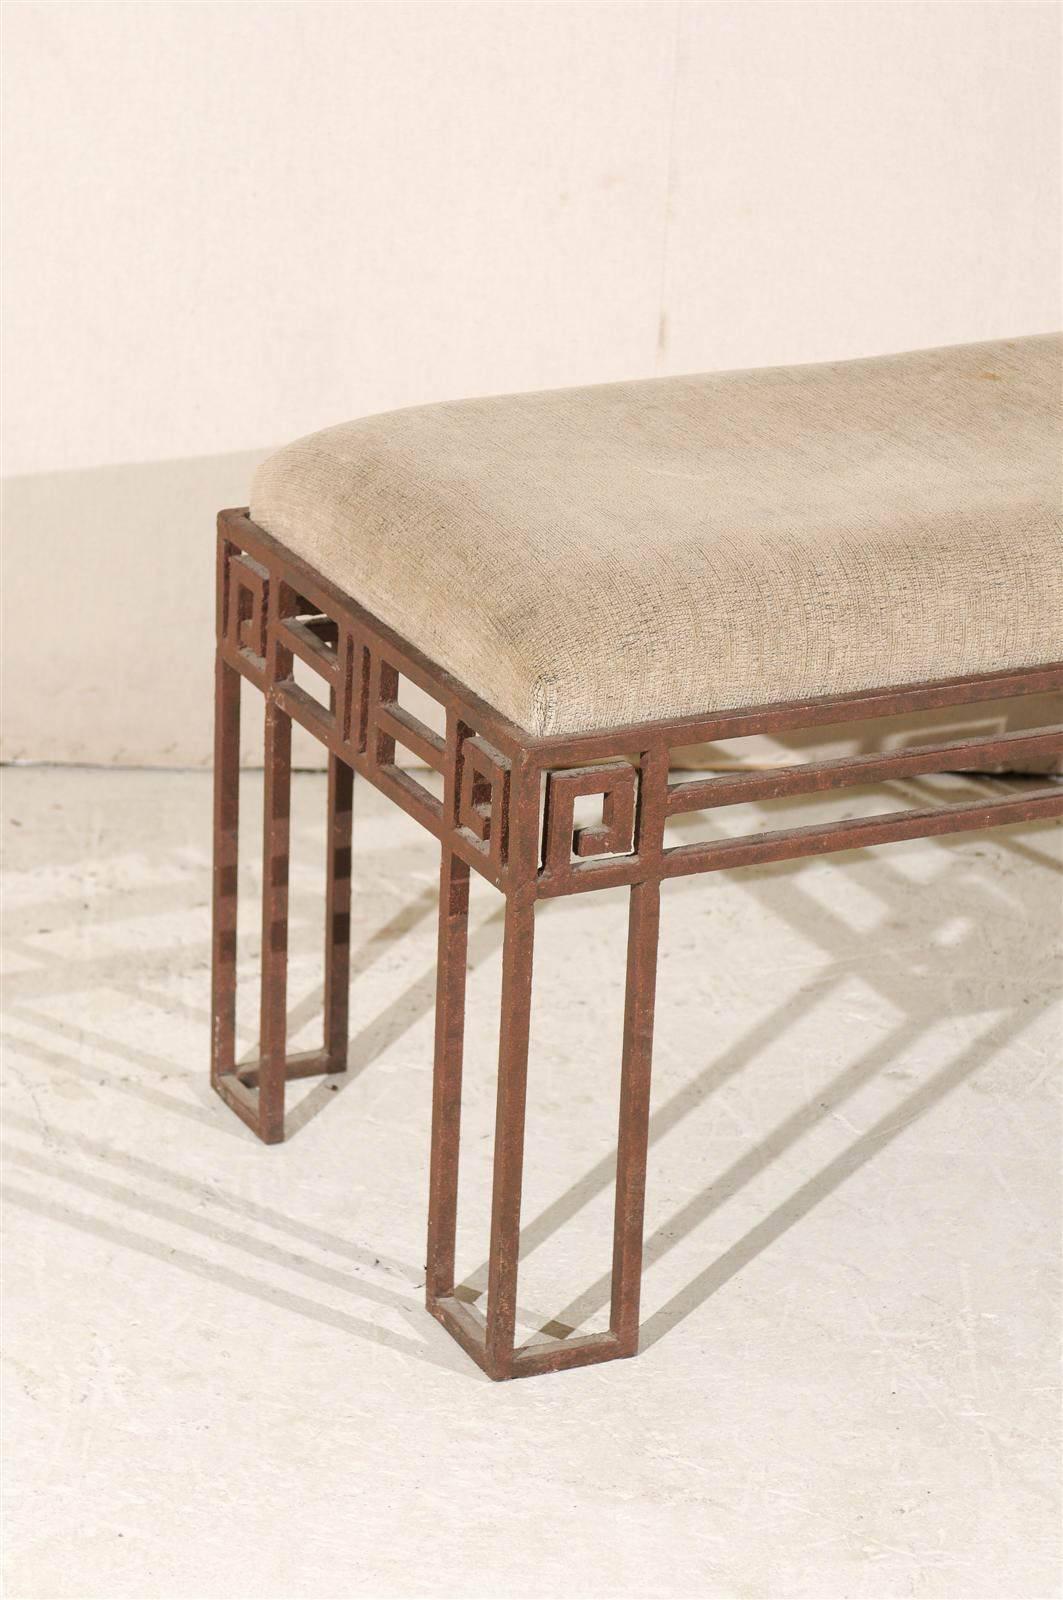 20th Century Art Deco Style Geometrical Pattern Bench with Square and Circle Shapes, American